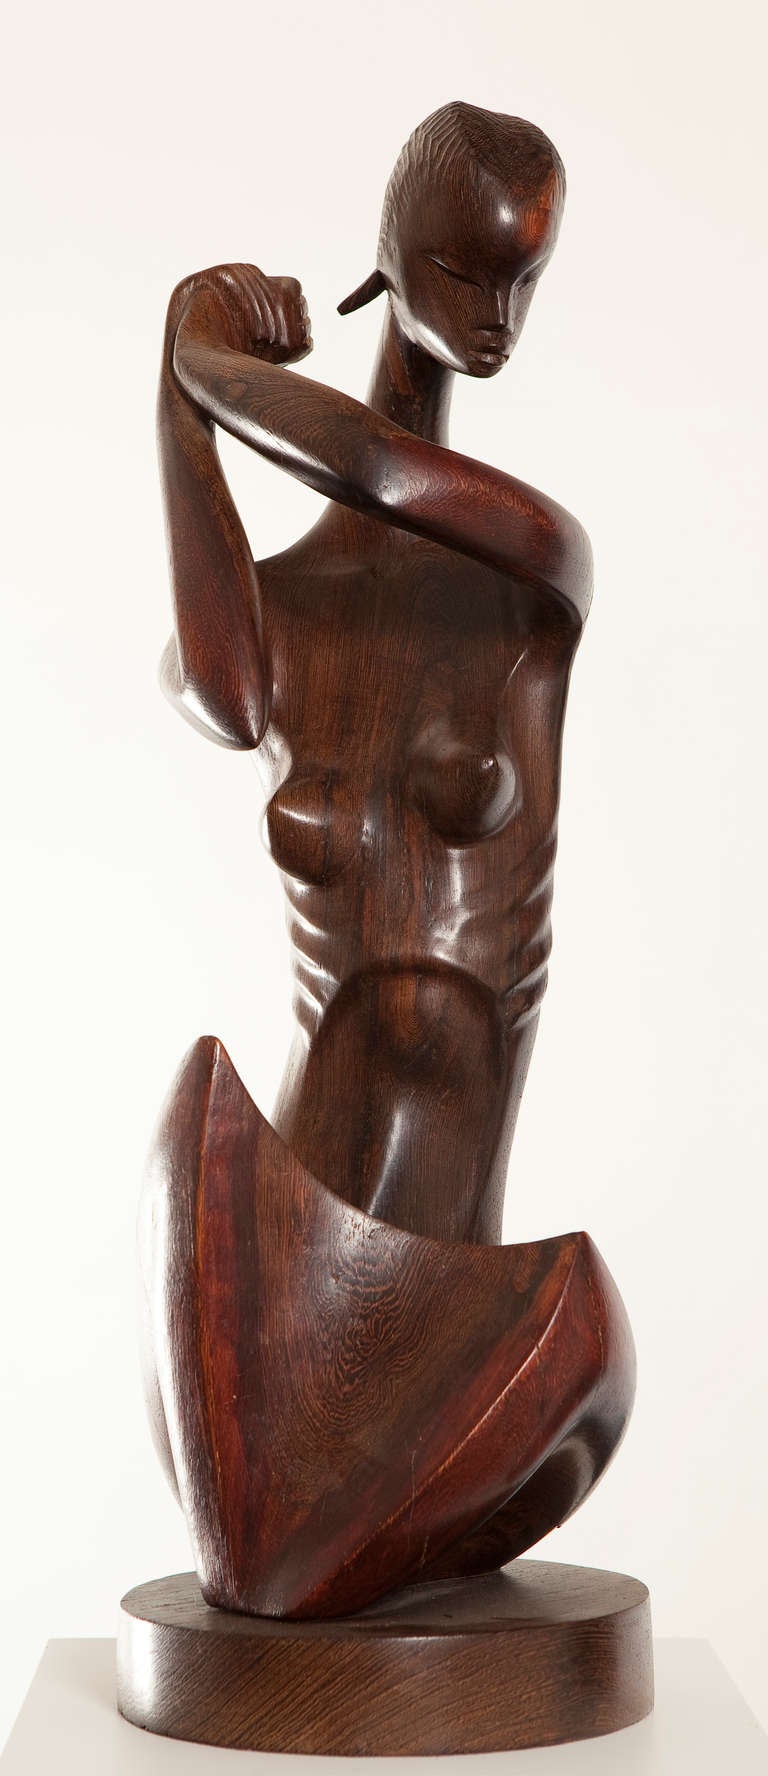 Very elegant sculpture in tropical wood influenced by some  other great 
European artists.